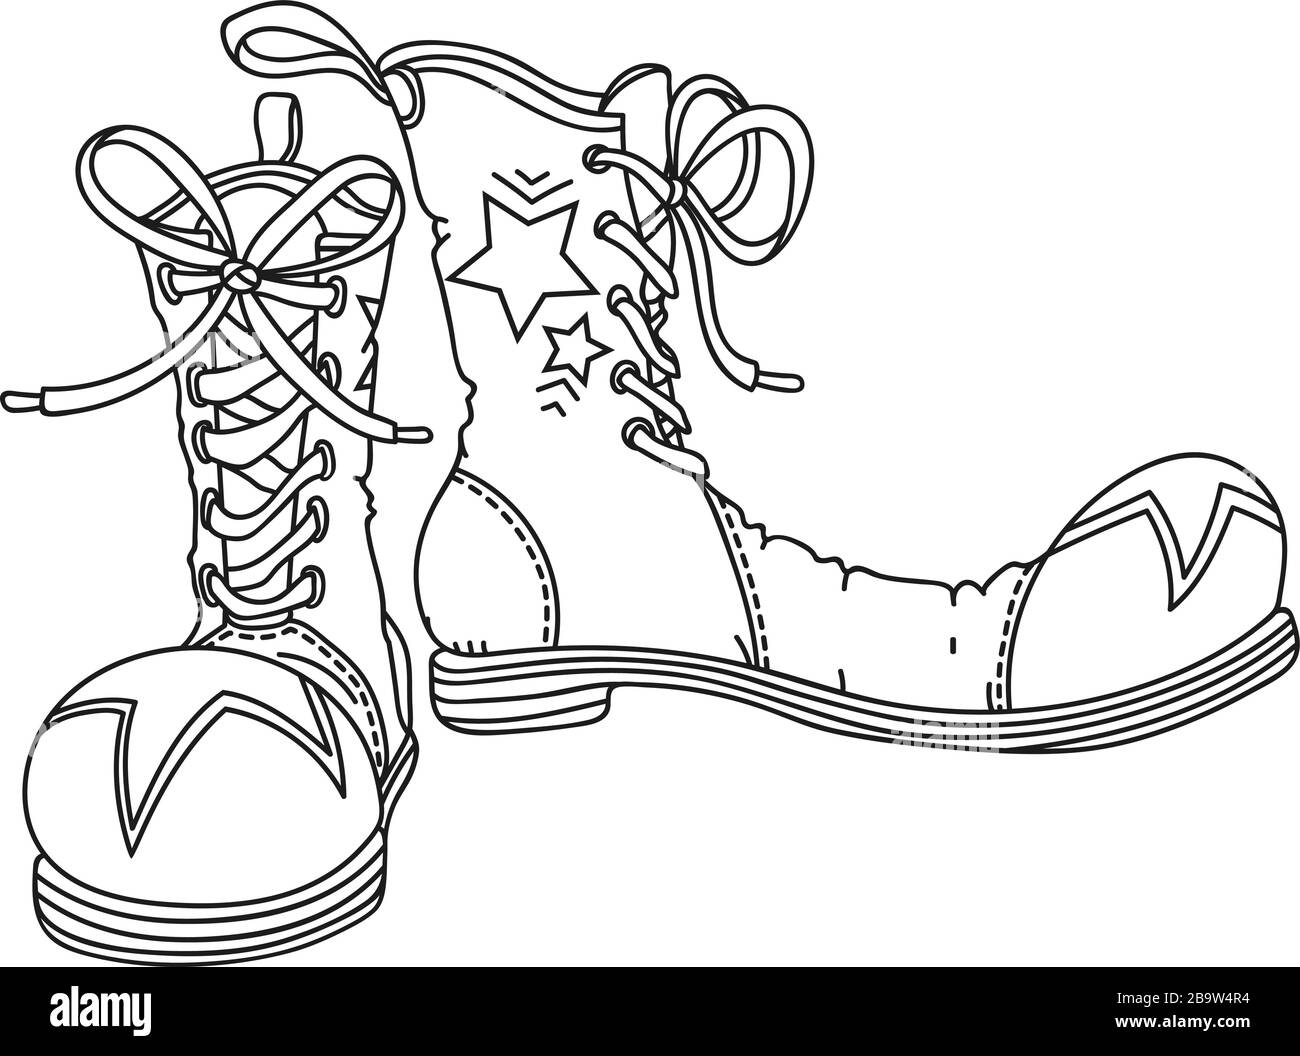 Clown's Shoes, hand drawn outline vector illustration Stock Vector